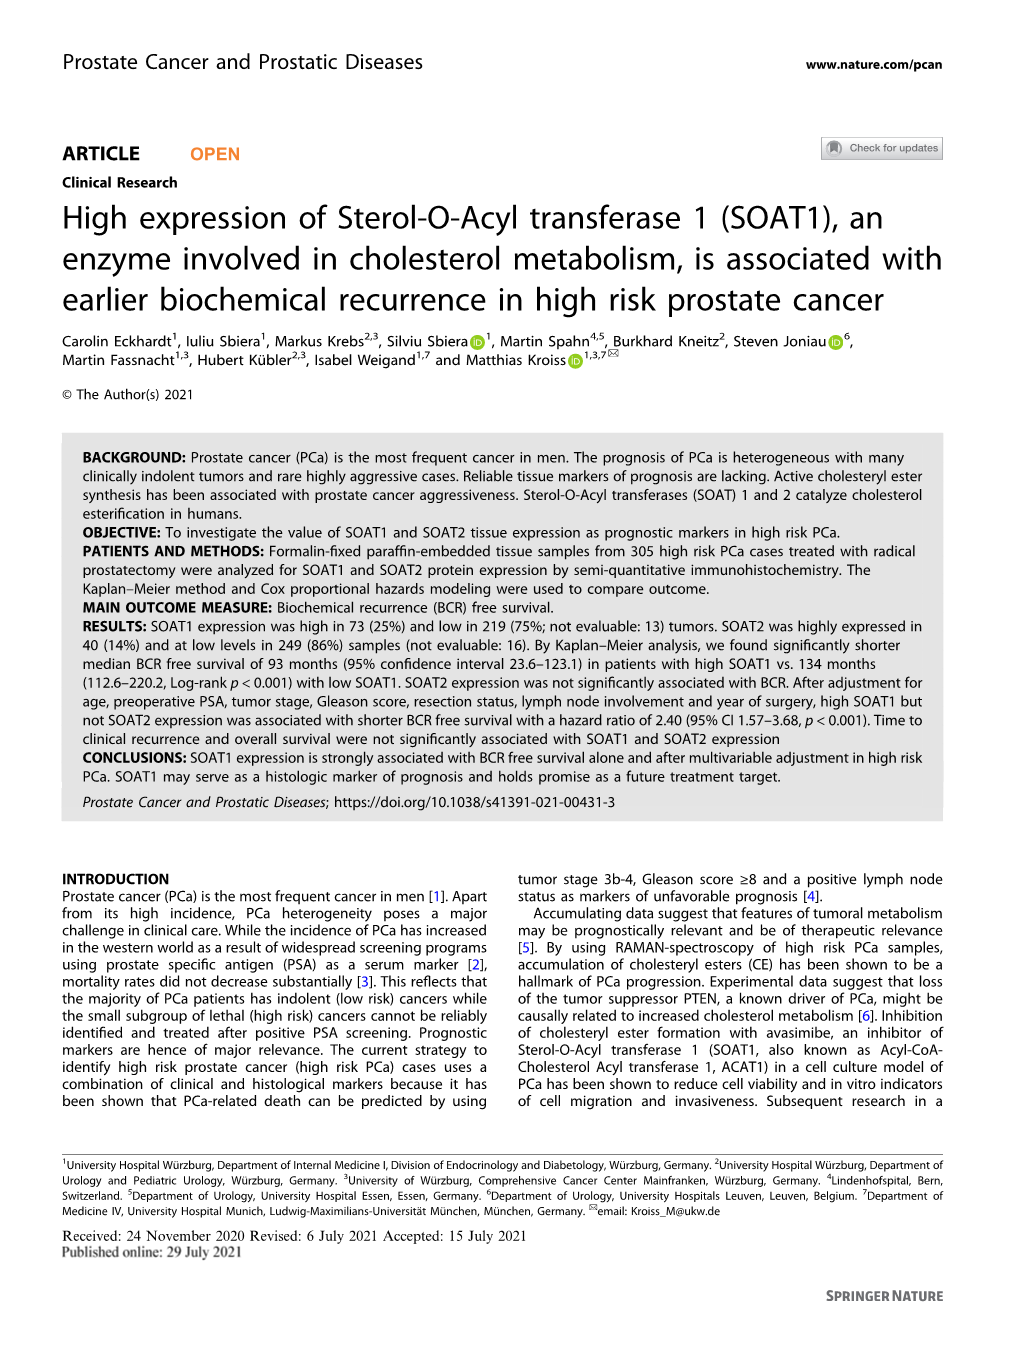 (SOAT1), an Enzyme Involved in Cholesterol Metabolism, Is Associated with Earlier Biochemical Recurrence in High Risk Prostate Cancer